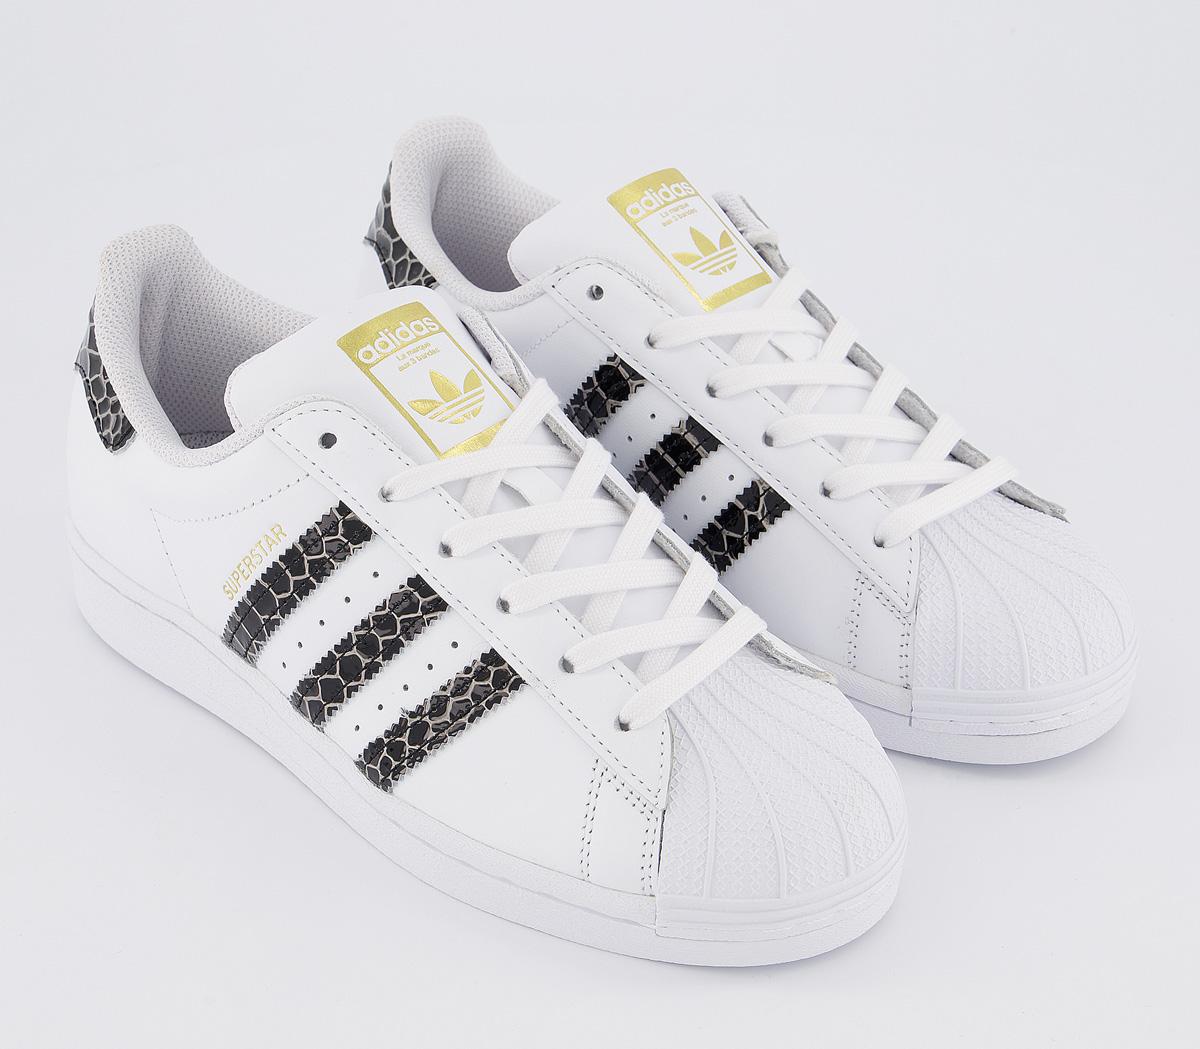 adidas Superstar Trainers White Black Gold Croc - Hers trainers